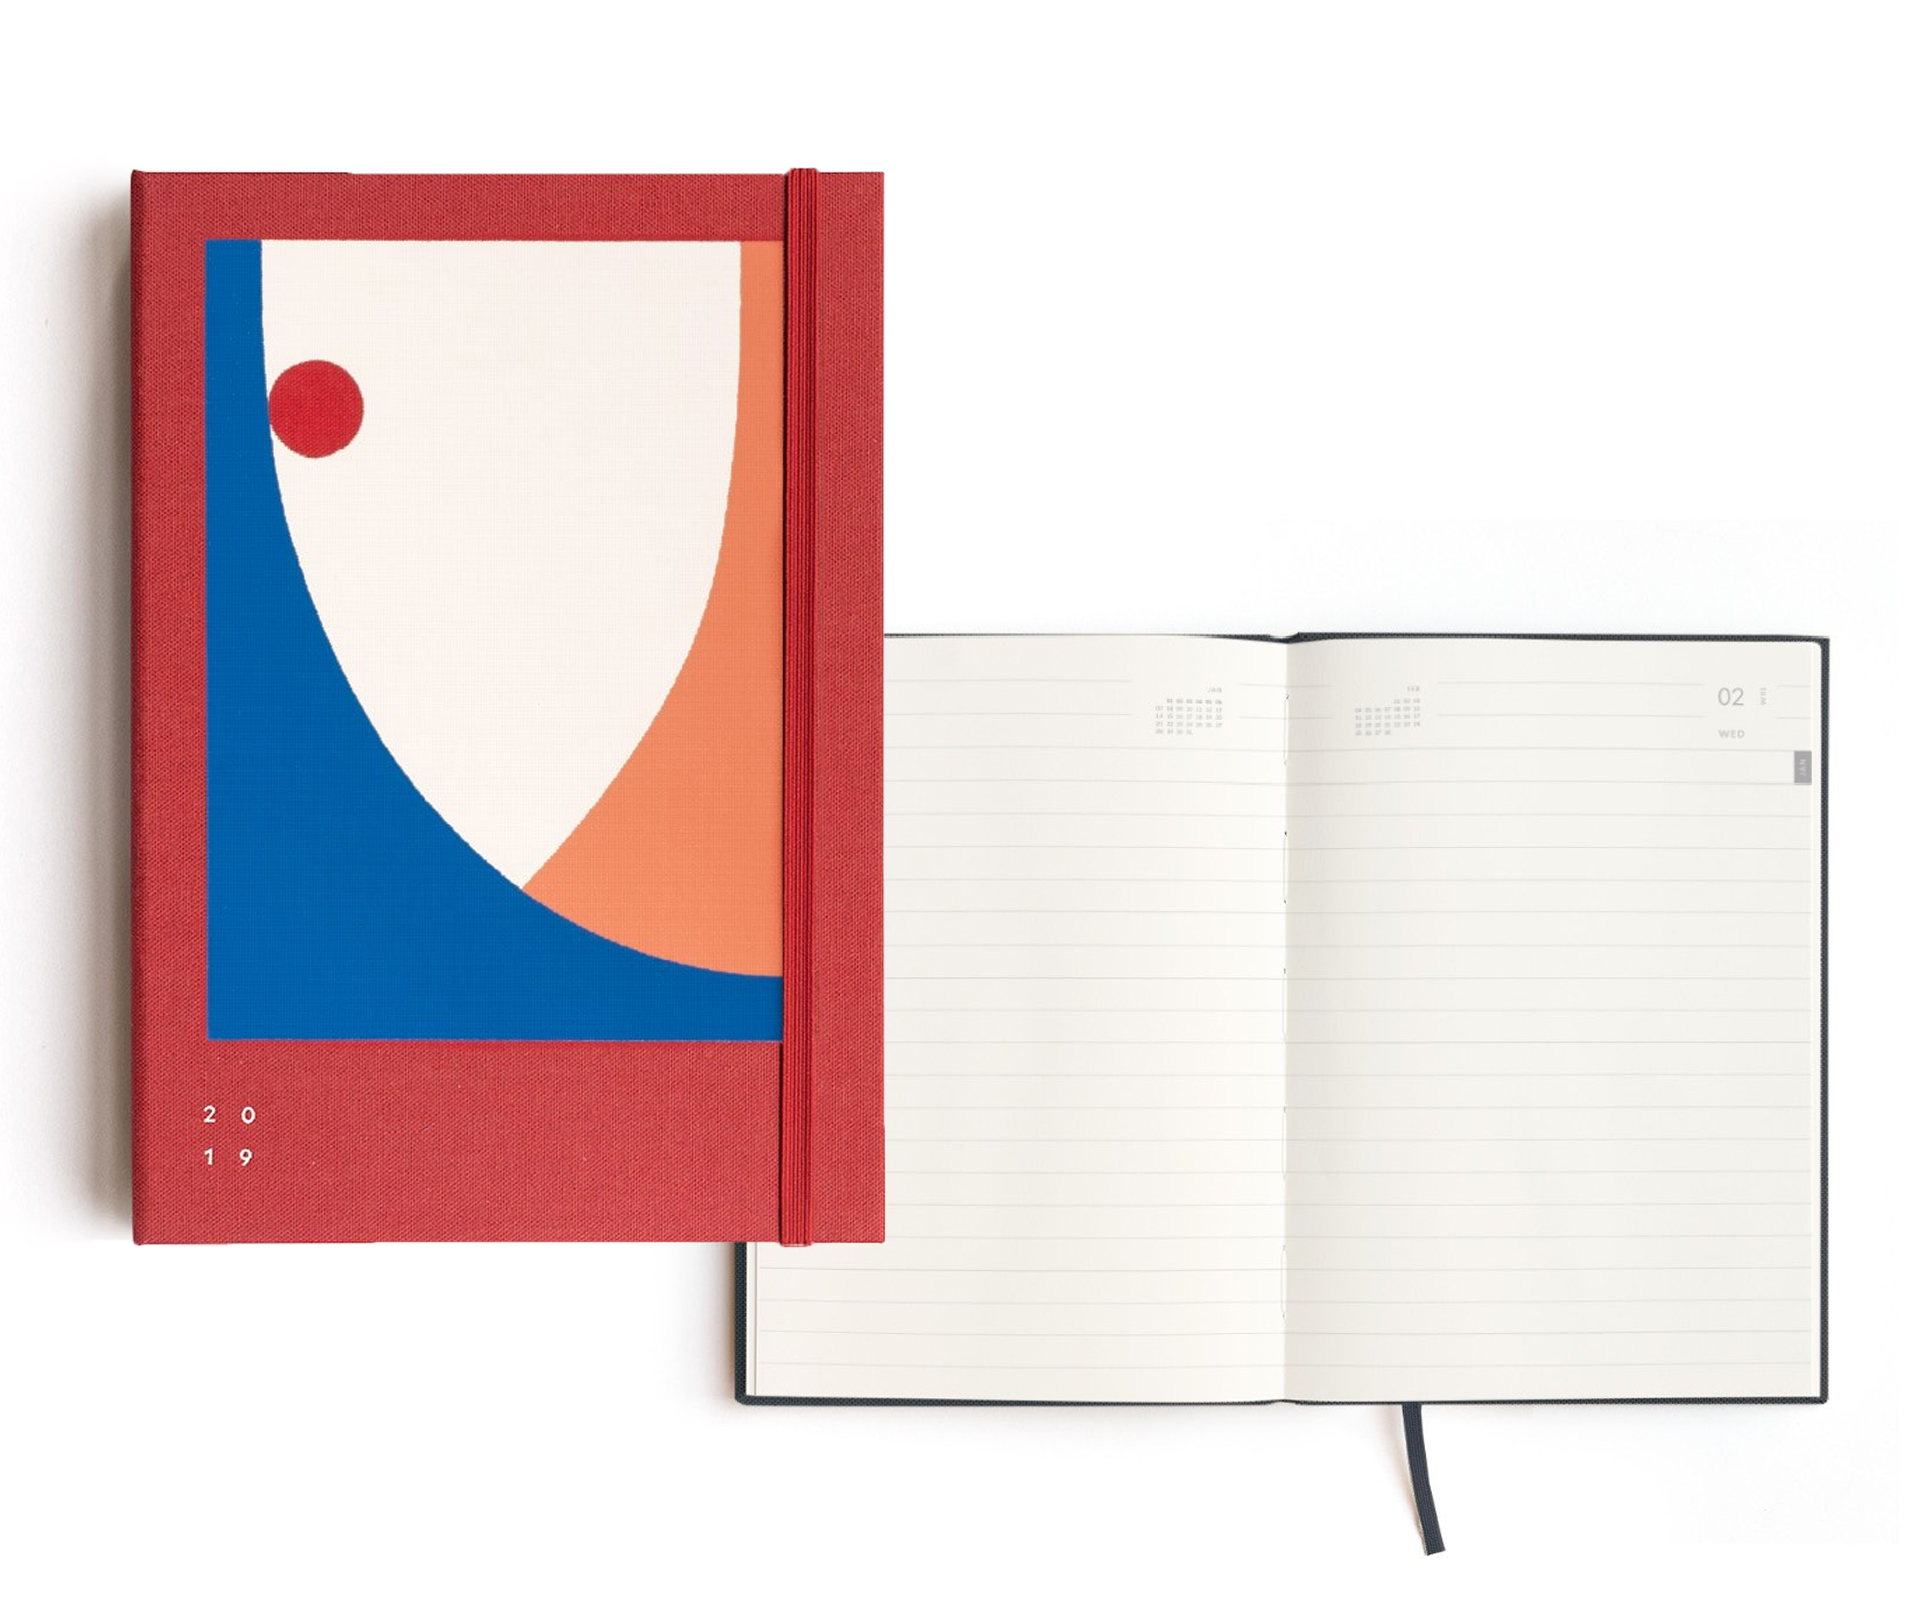 12. Milligram Studio 2019 non-diary The ‘non-diary’ is a diary for people who don’t use a diary. Confused? Let me explain; the subtle dates in the top corners offers the flexibility of a notebook with the structure of a daily diary (so it’s a diary, without looking explicitly like a diary). Around $50 from Milligram.